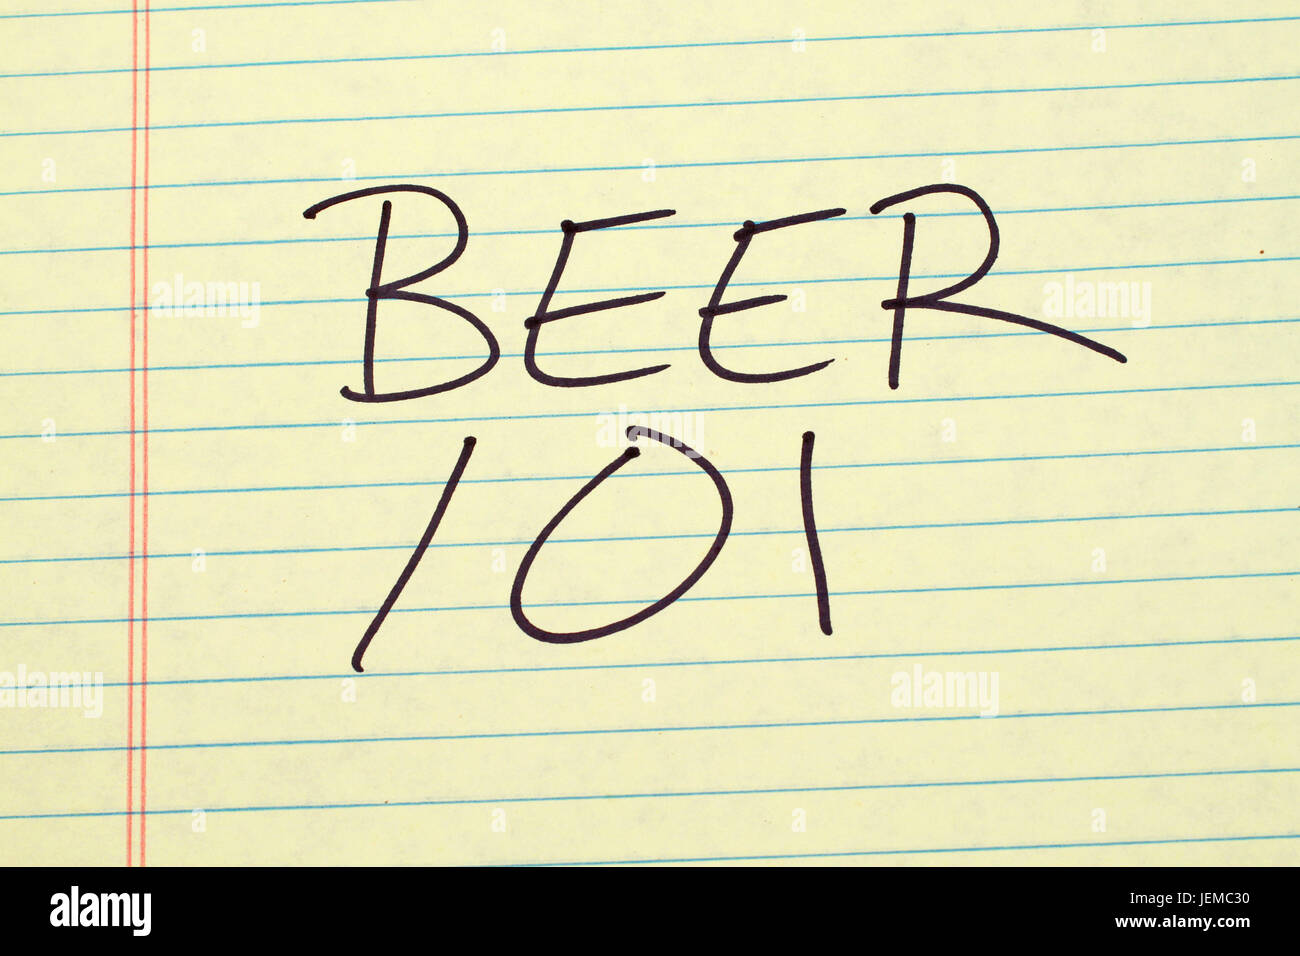 The words 'Beer 101' on a yellow legal pad Stock Photo